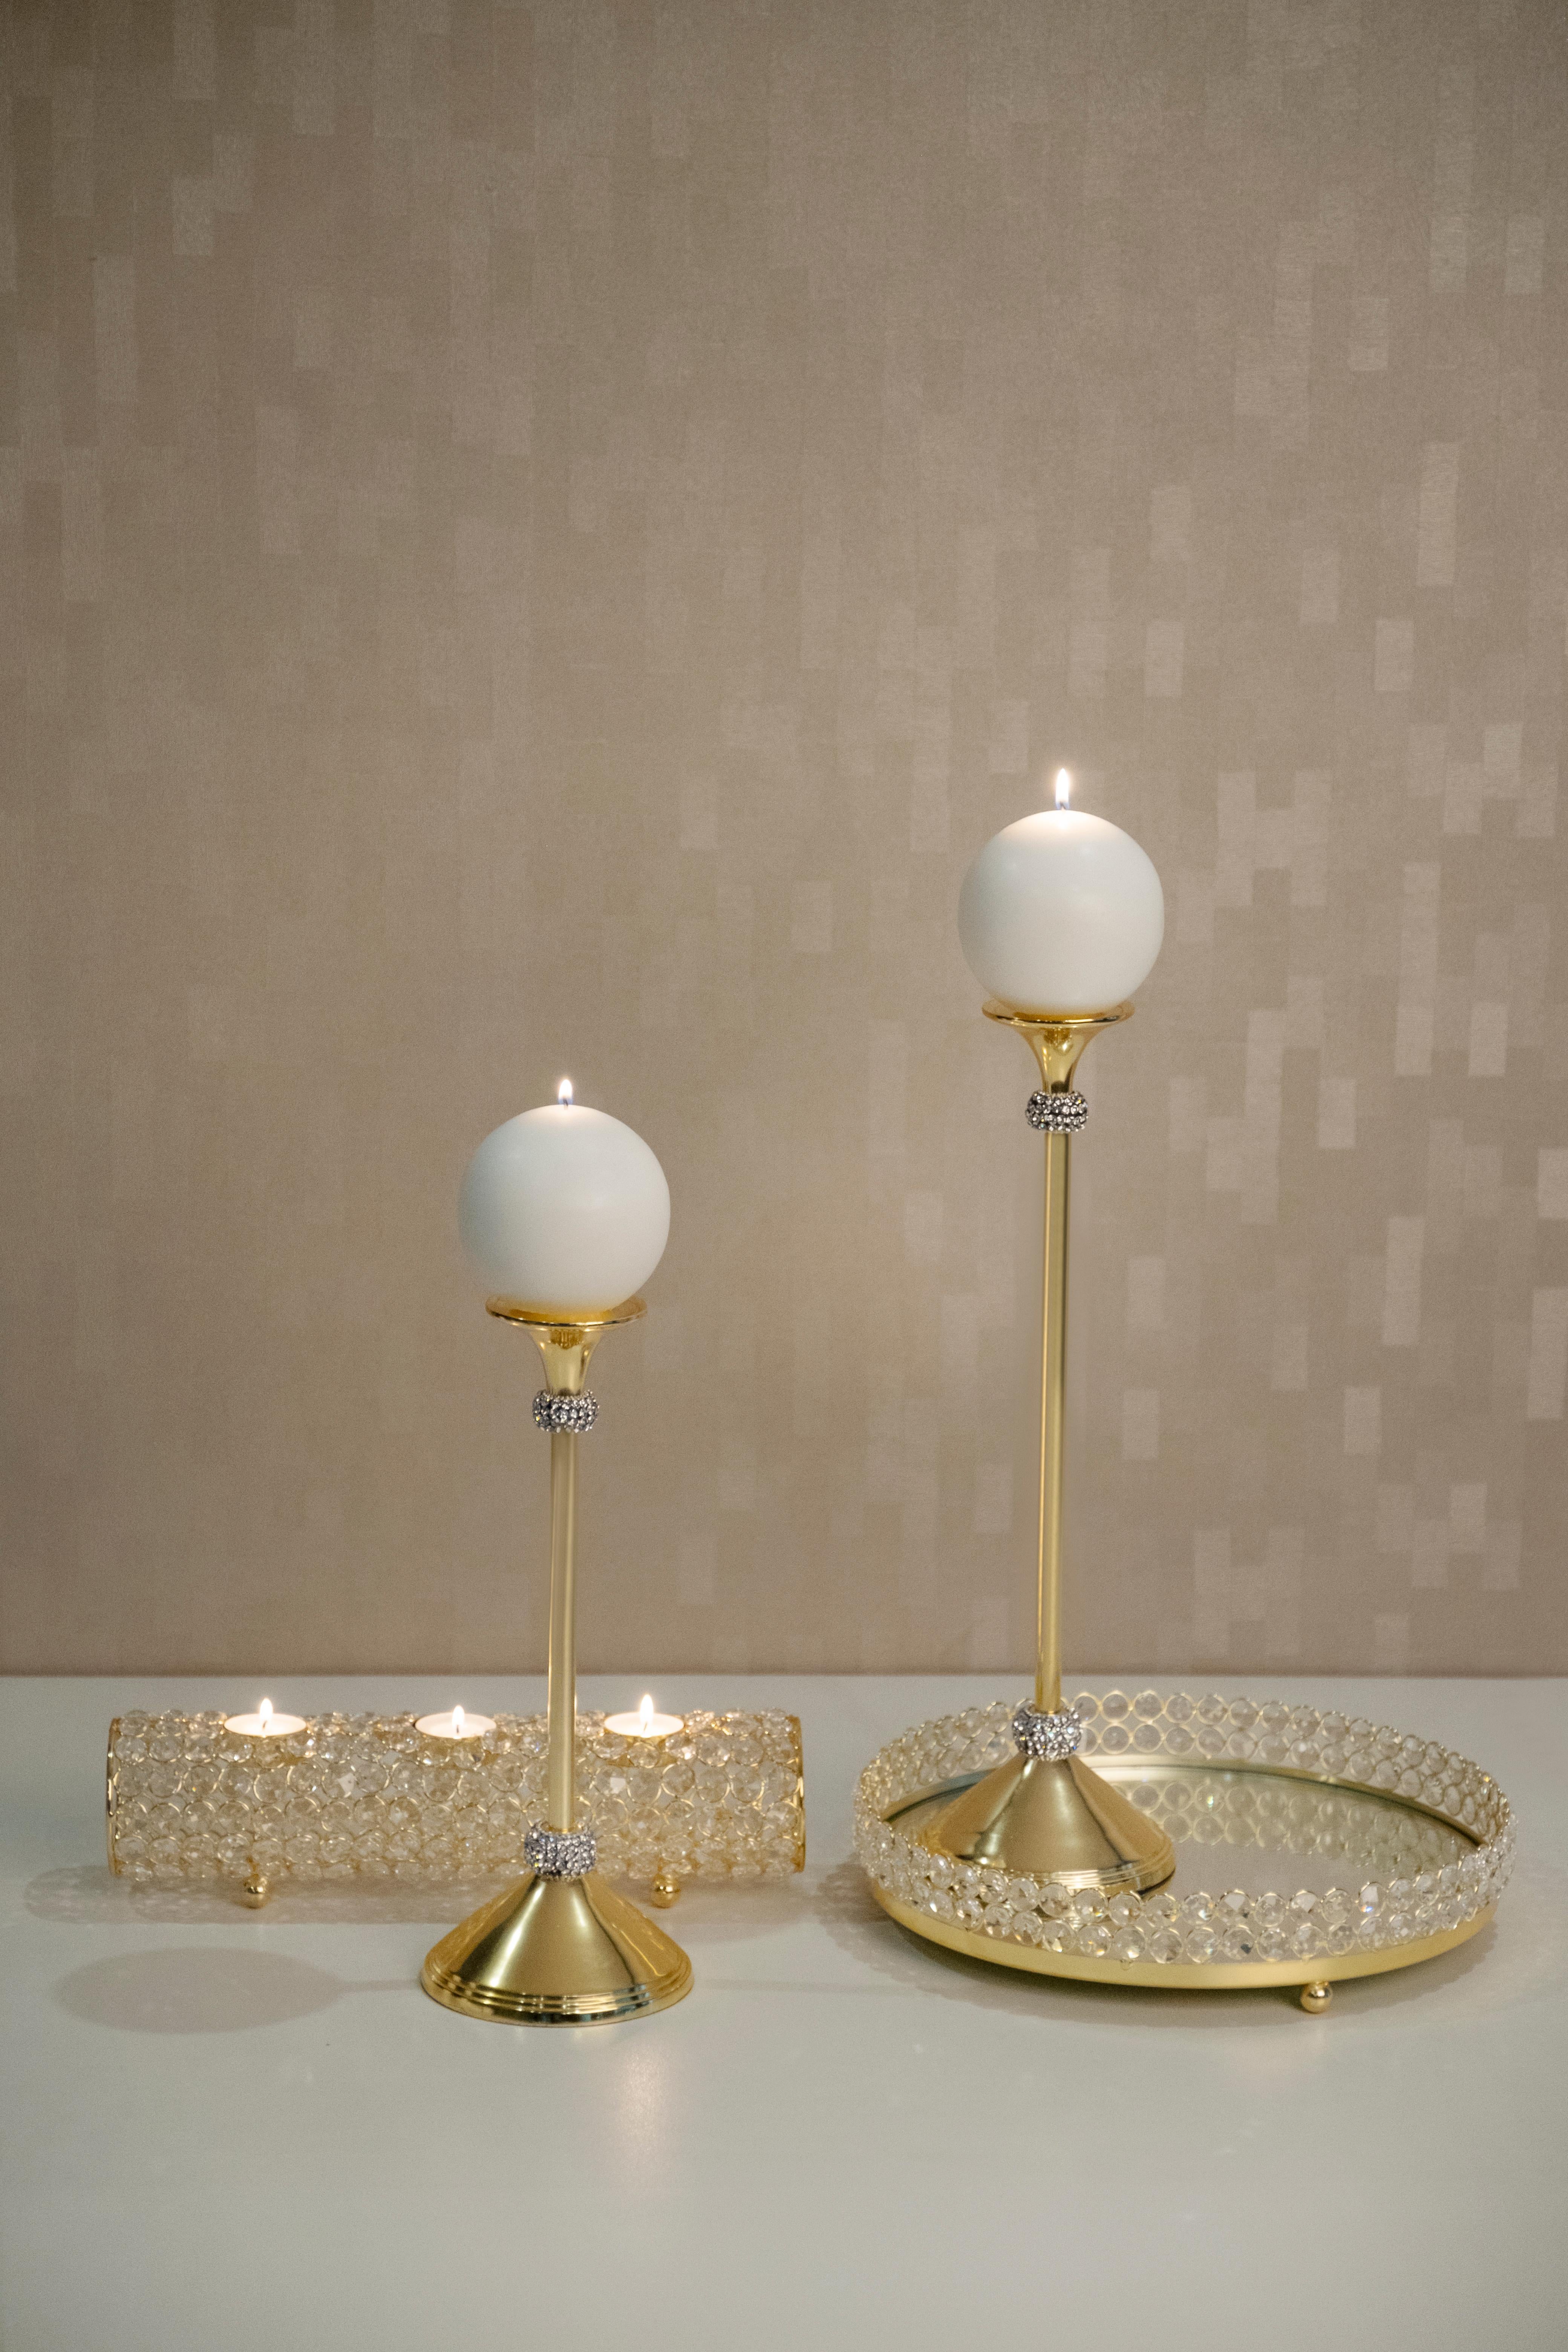 Miura, Diadora and Azura Decorative Pieces, Lusitanus Home Collection, by Lusitanus Home.

This beautiful set includes two candleholders, one tray and one tube f/3 tealights, perfect to be displayed together in endless combinations. Each piece has